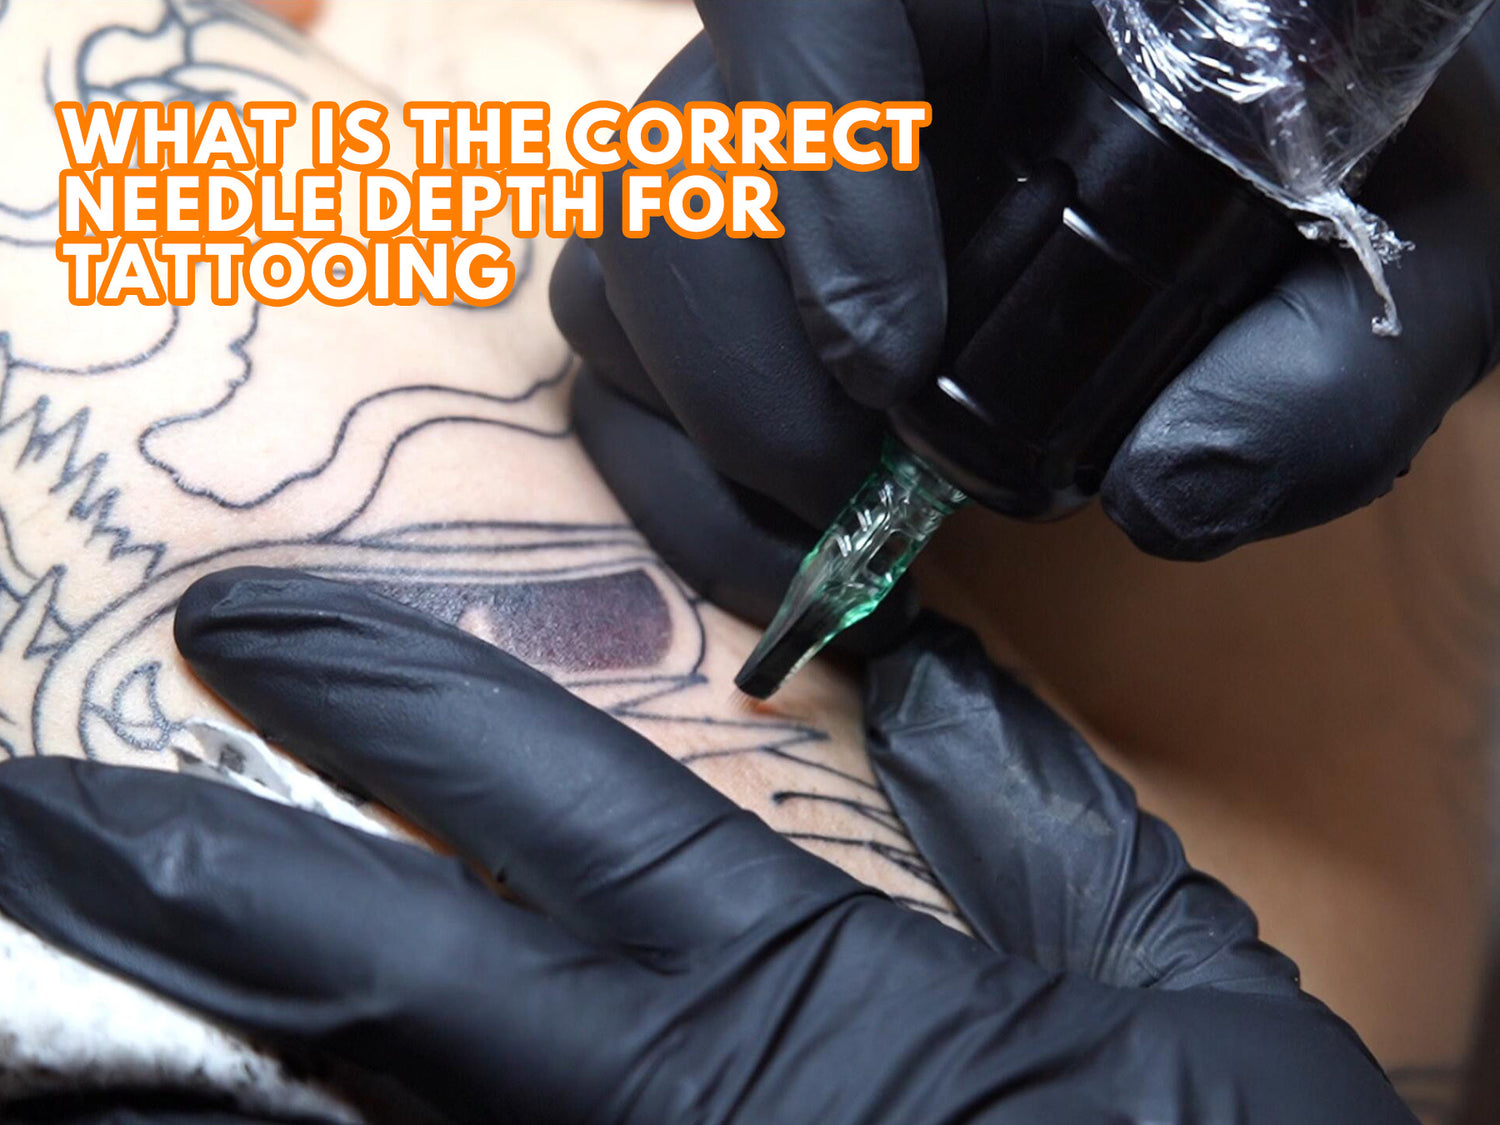 What is the Correct Needle Depth for Tattooing?